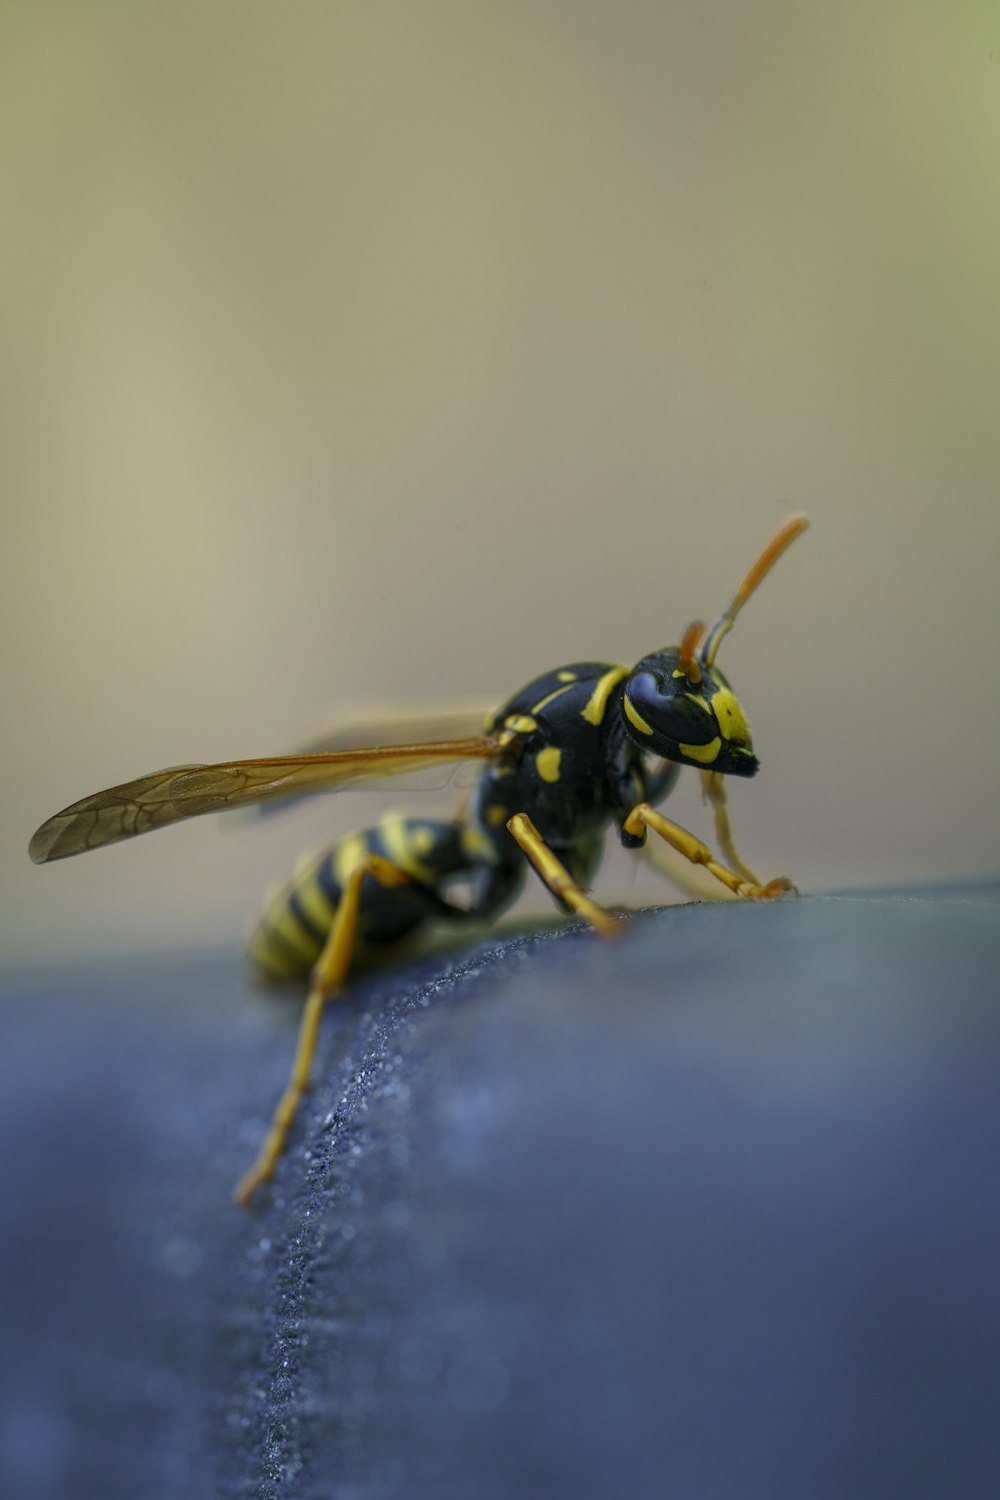 a yellow and black insect sitting on top of a blue surface